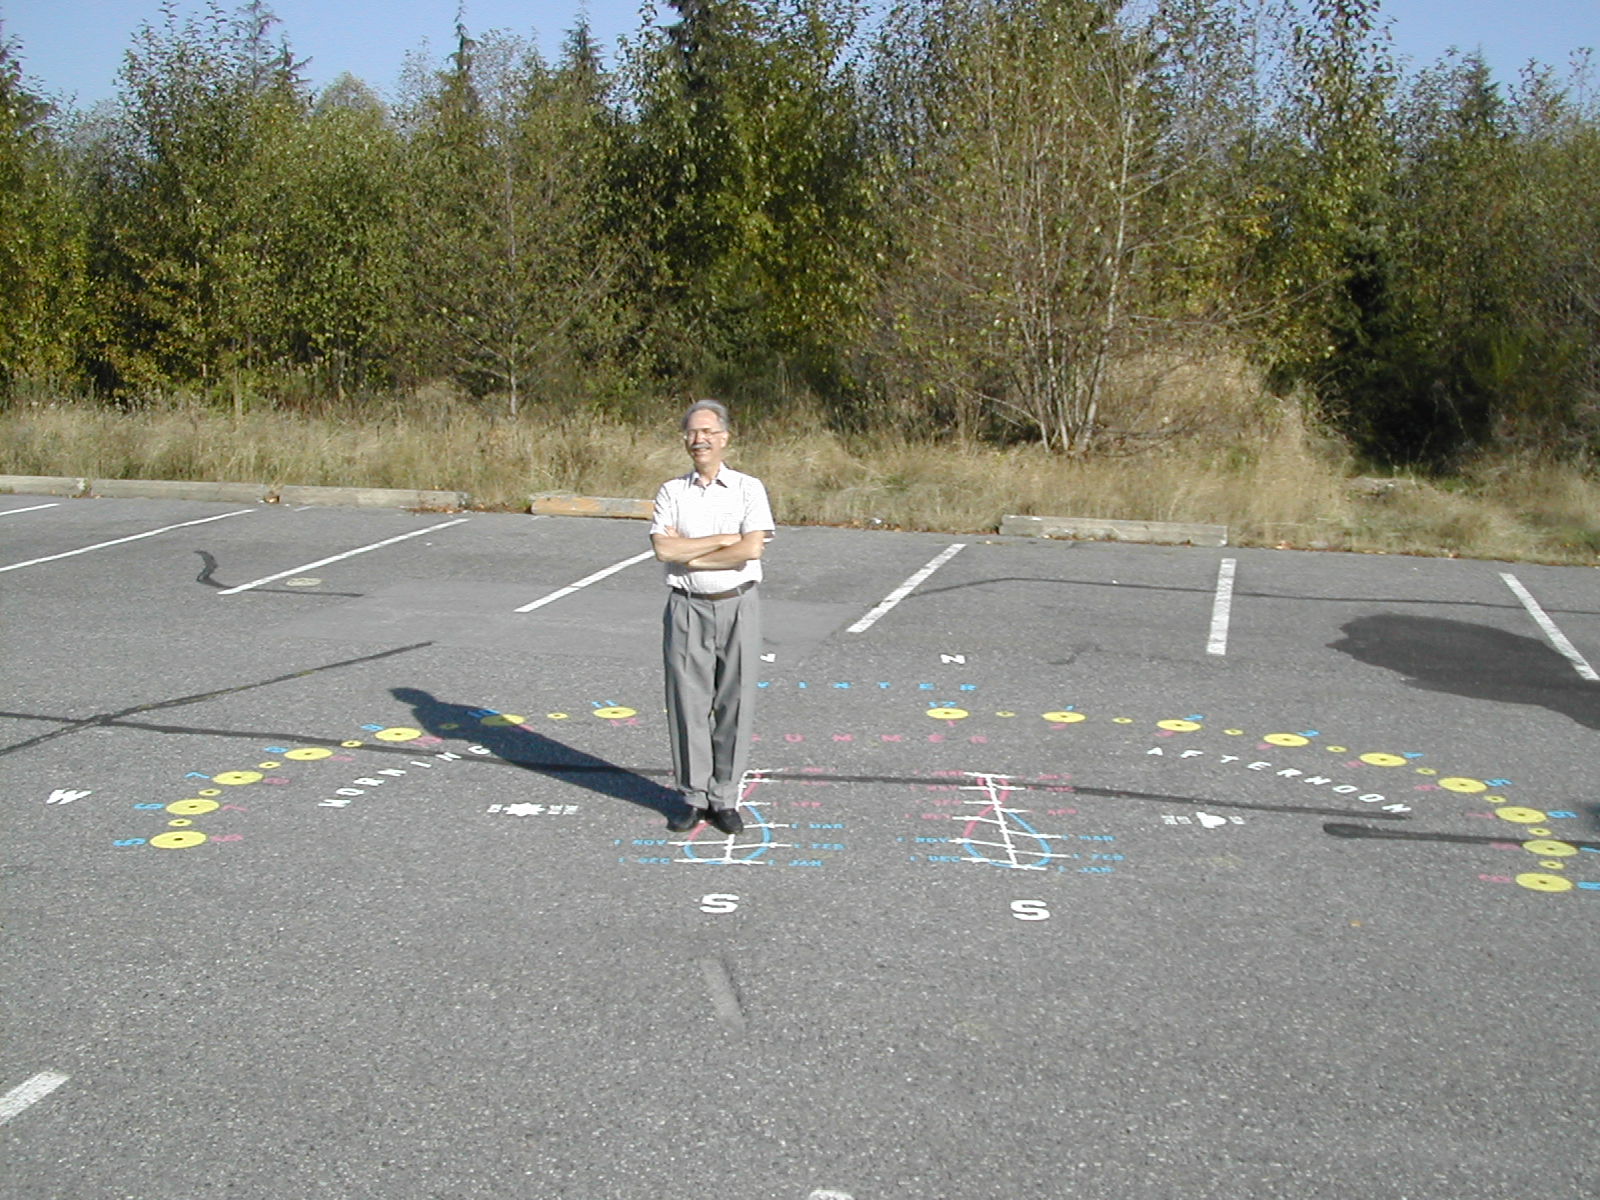 Dr. Berggren demonstrating how to read time using the analemmatical sundial at SFU.